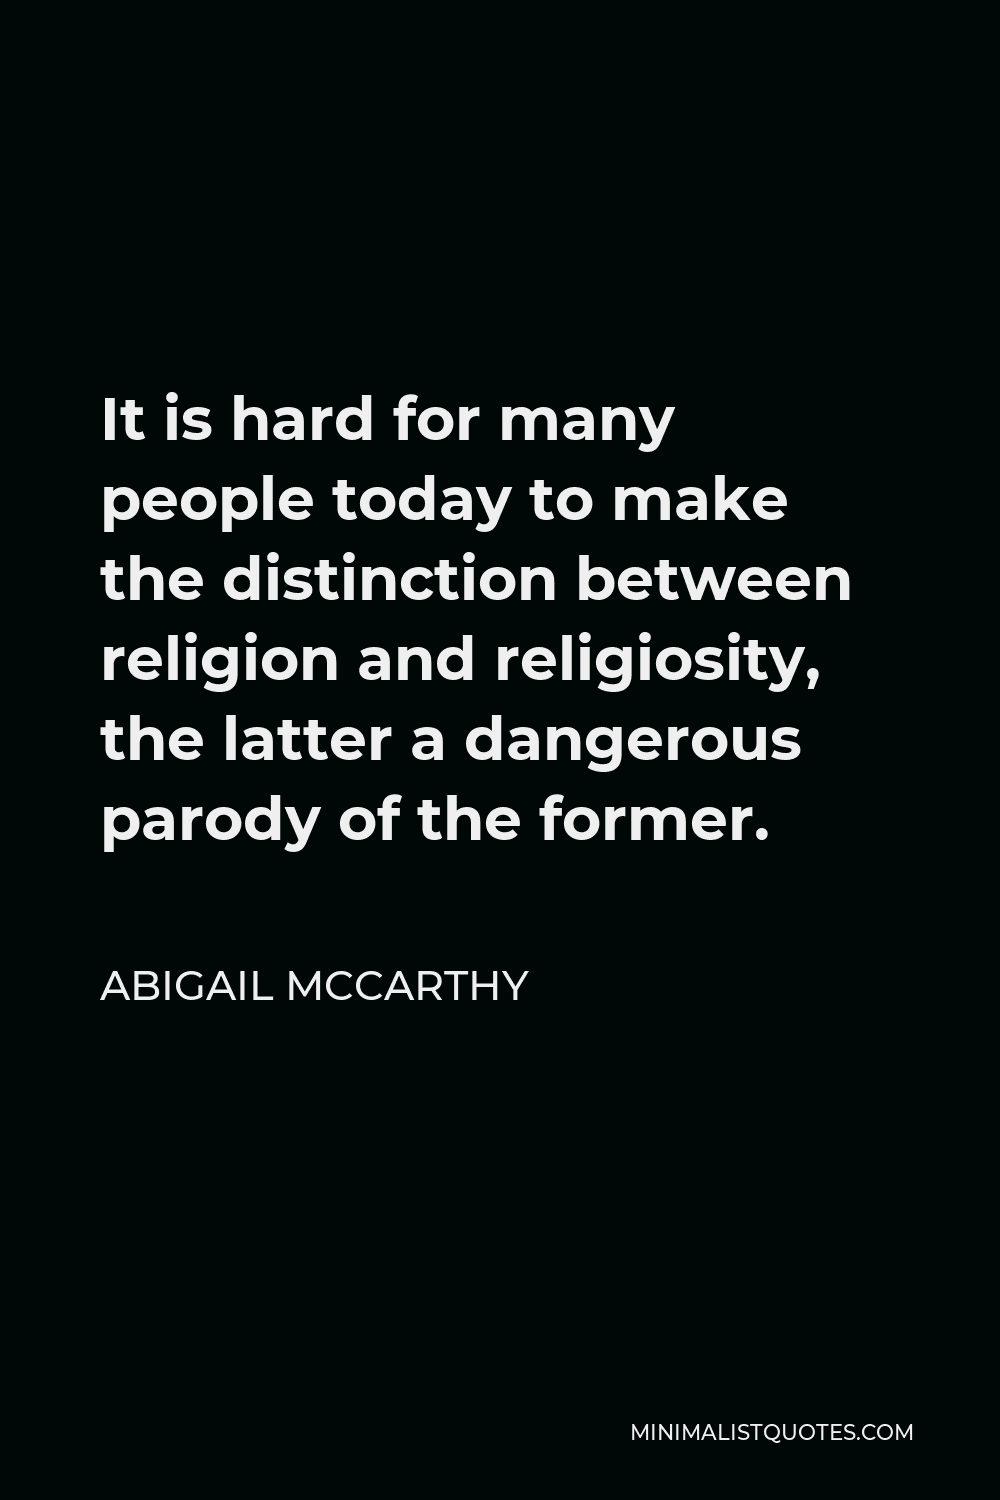 Abigail McCarthy Quote - It is hard for many people today to make the distinction between religion and religiosity, the latter a dangerous parody of the former.